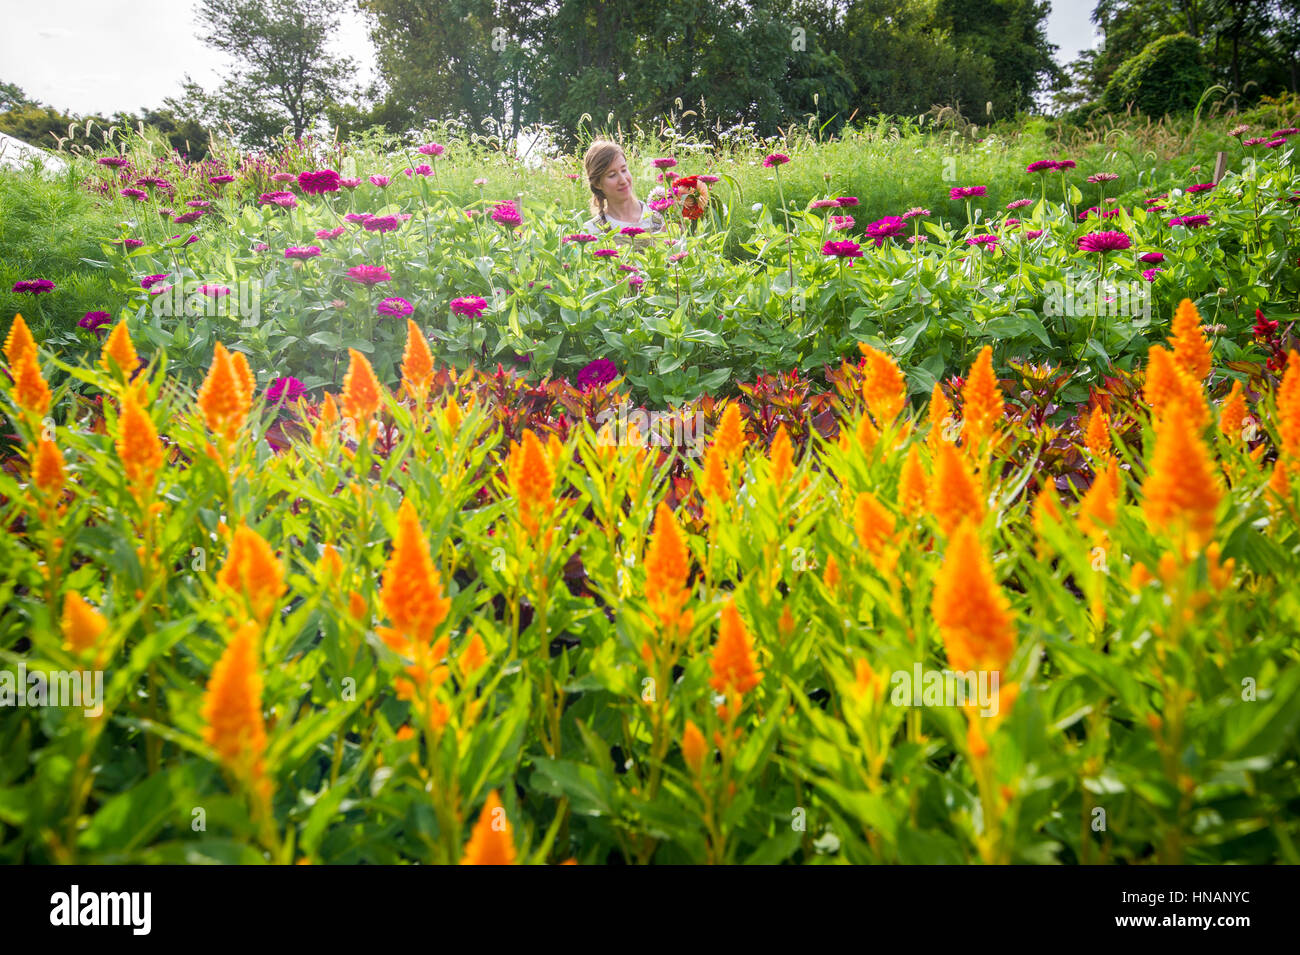 A woman stands in a garden and examines a bouquet of freshly cut flowers on a farm in rural Maryland. Stock Photo